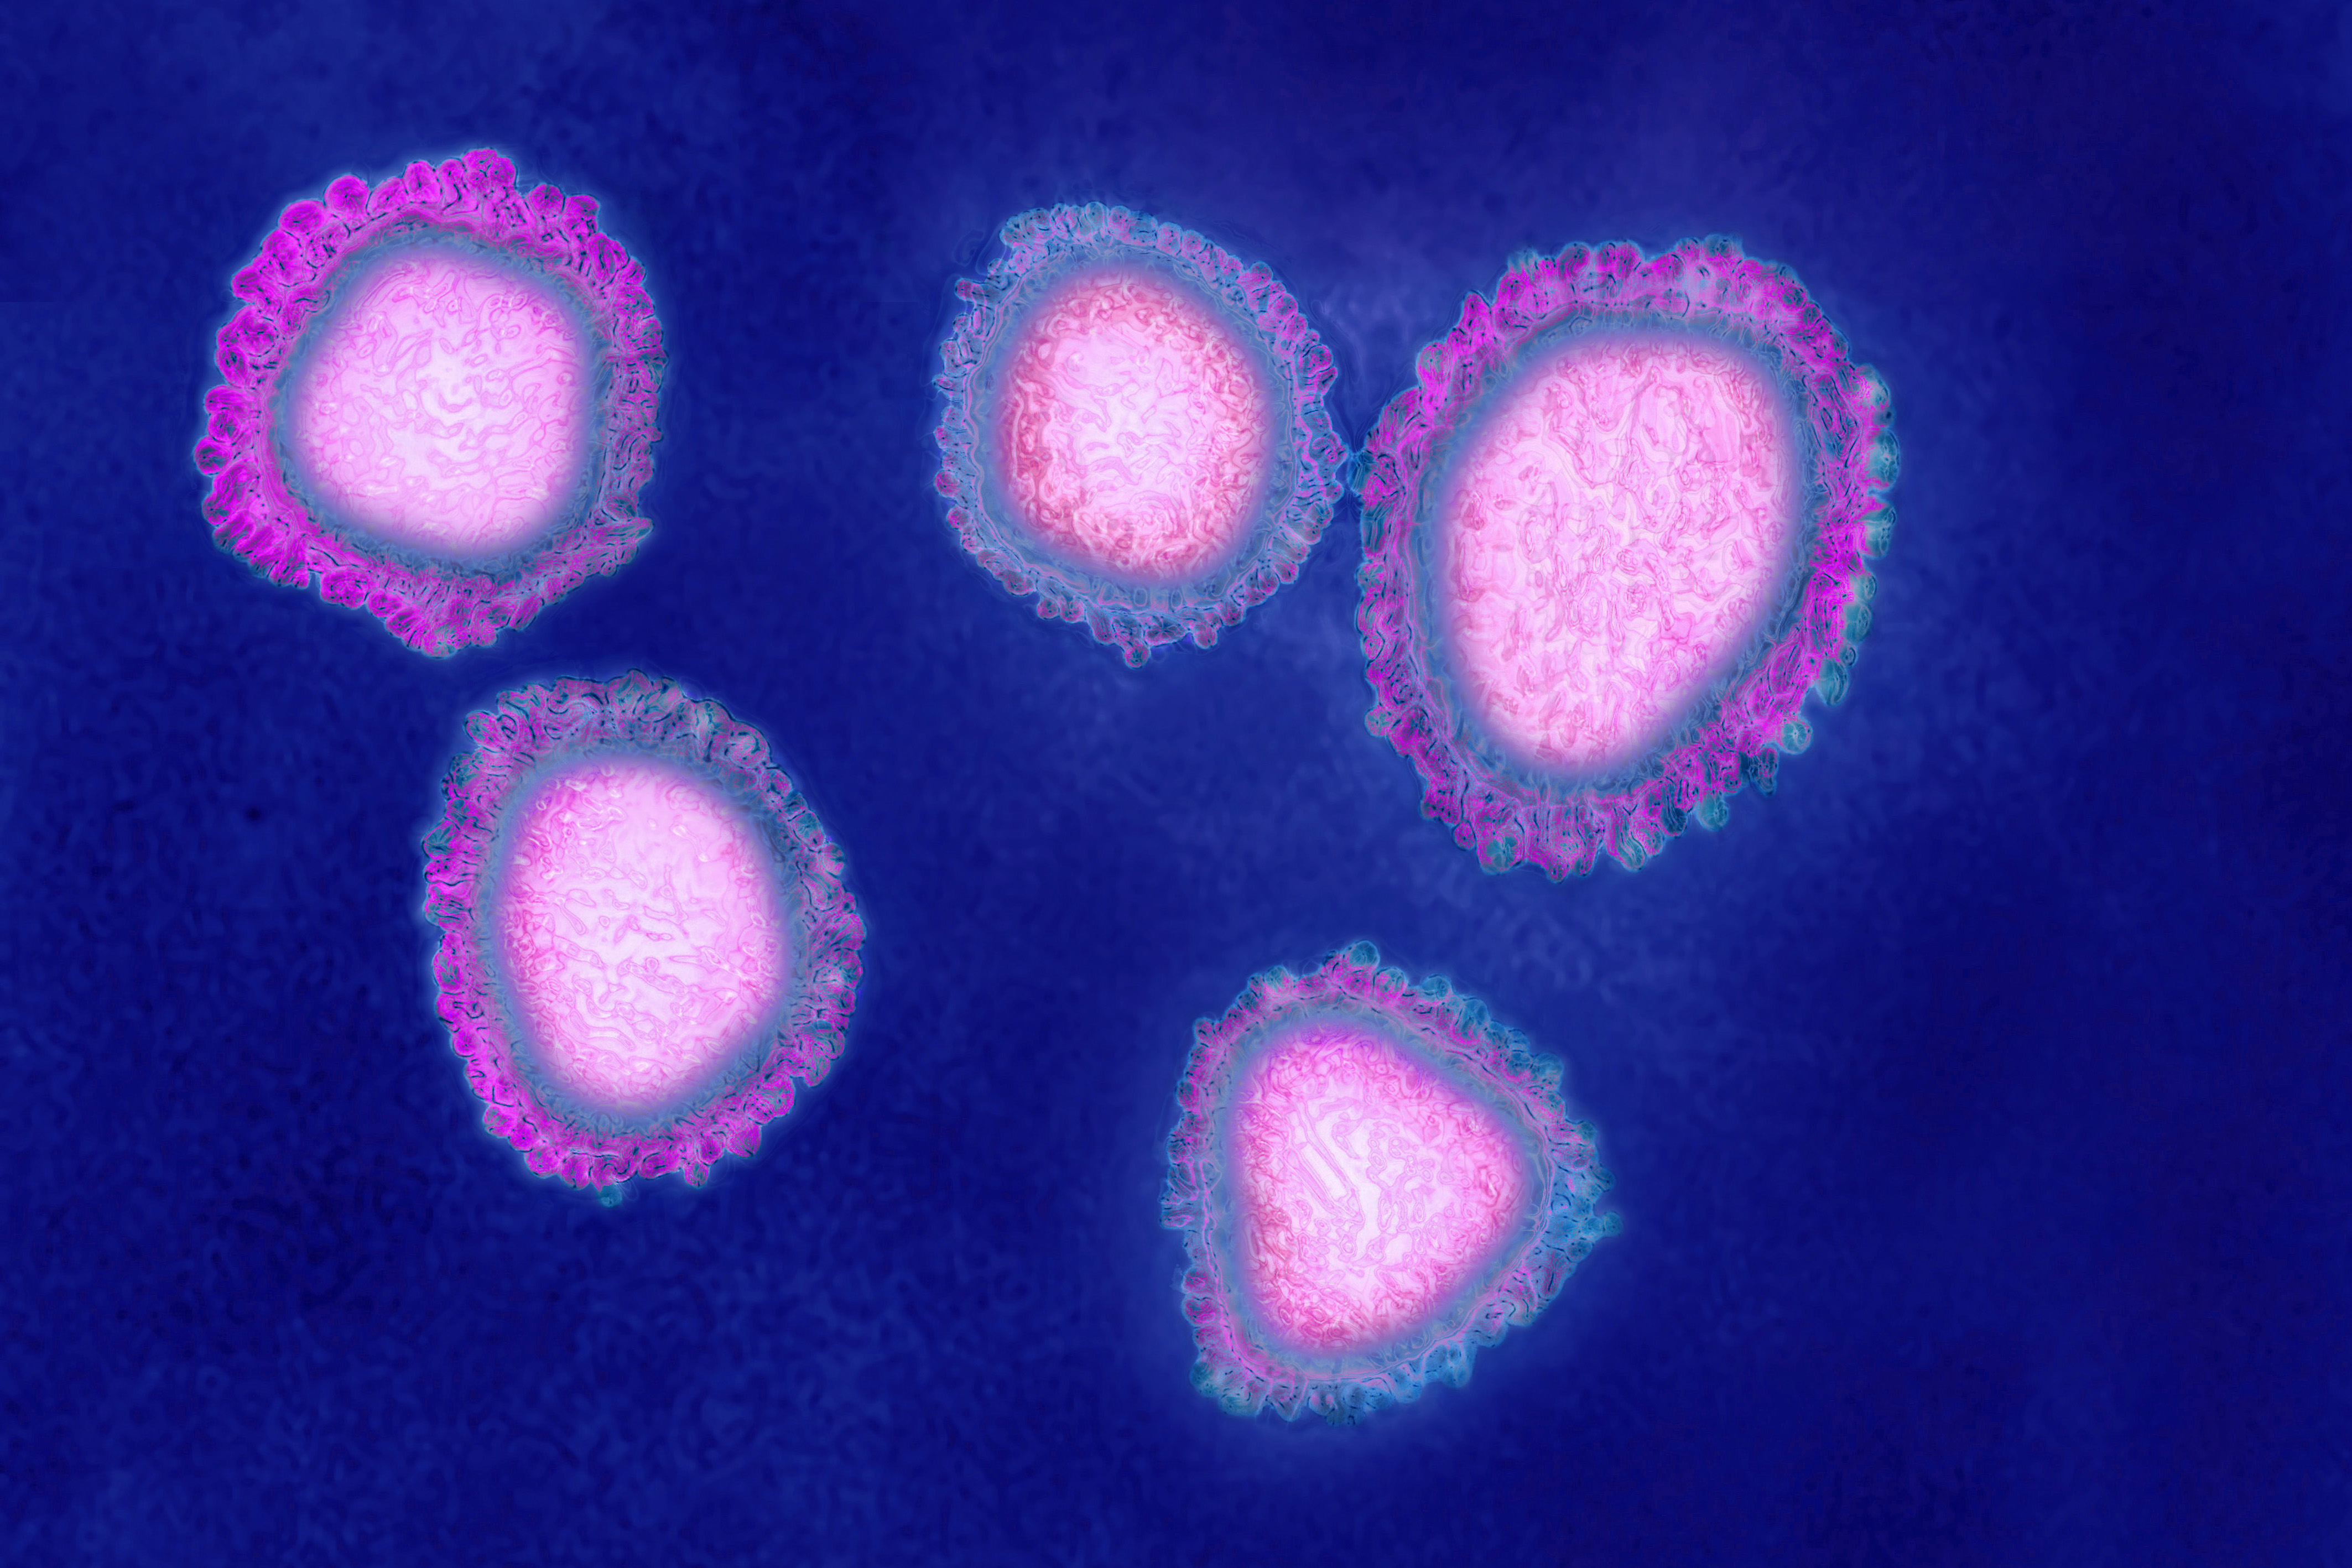 Never-before-seen virus may be behind mystery outbreak in China | Ars Technica4252 x 2835